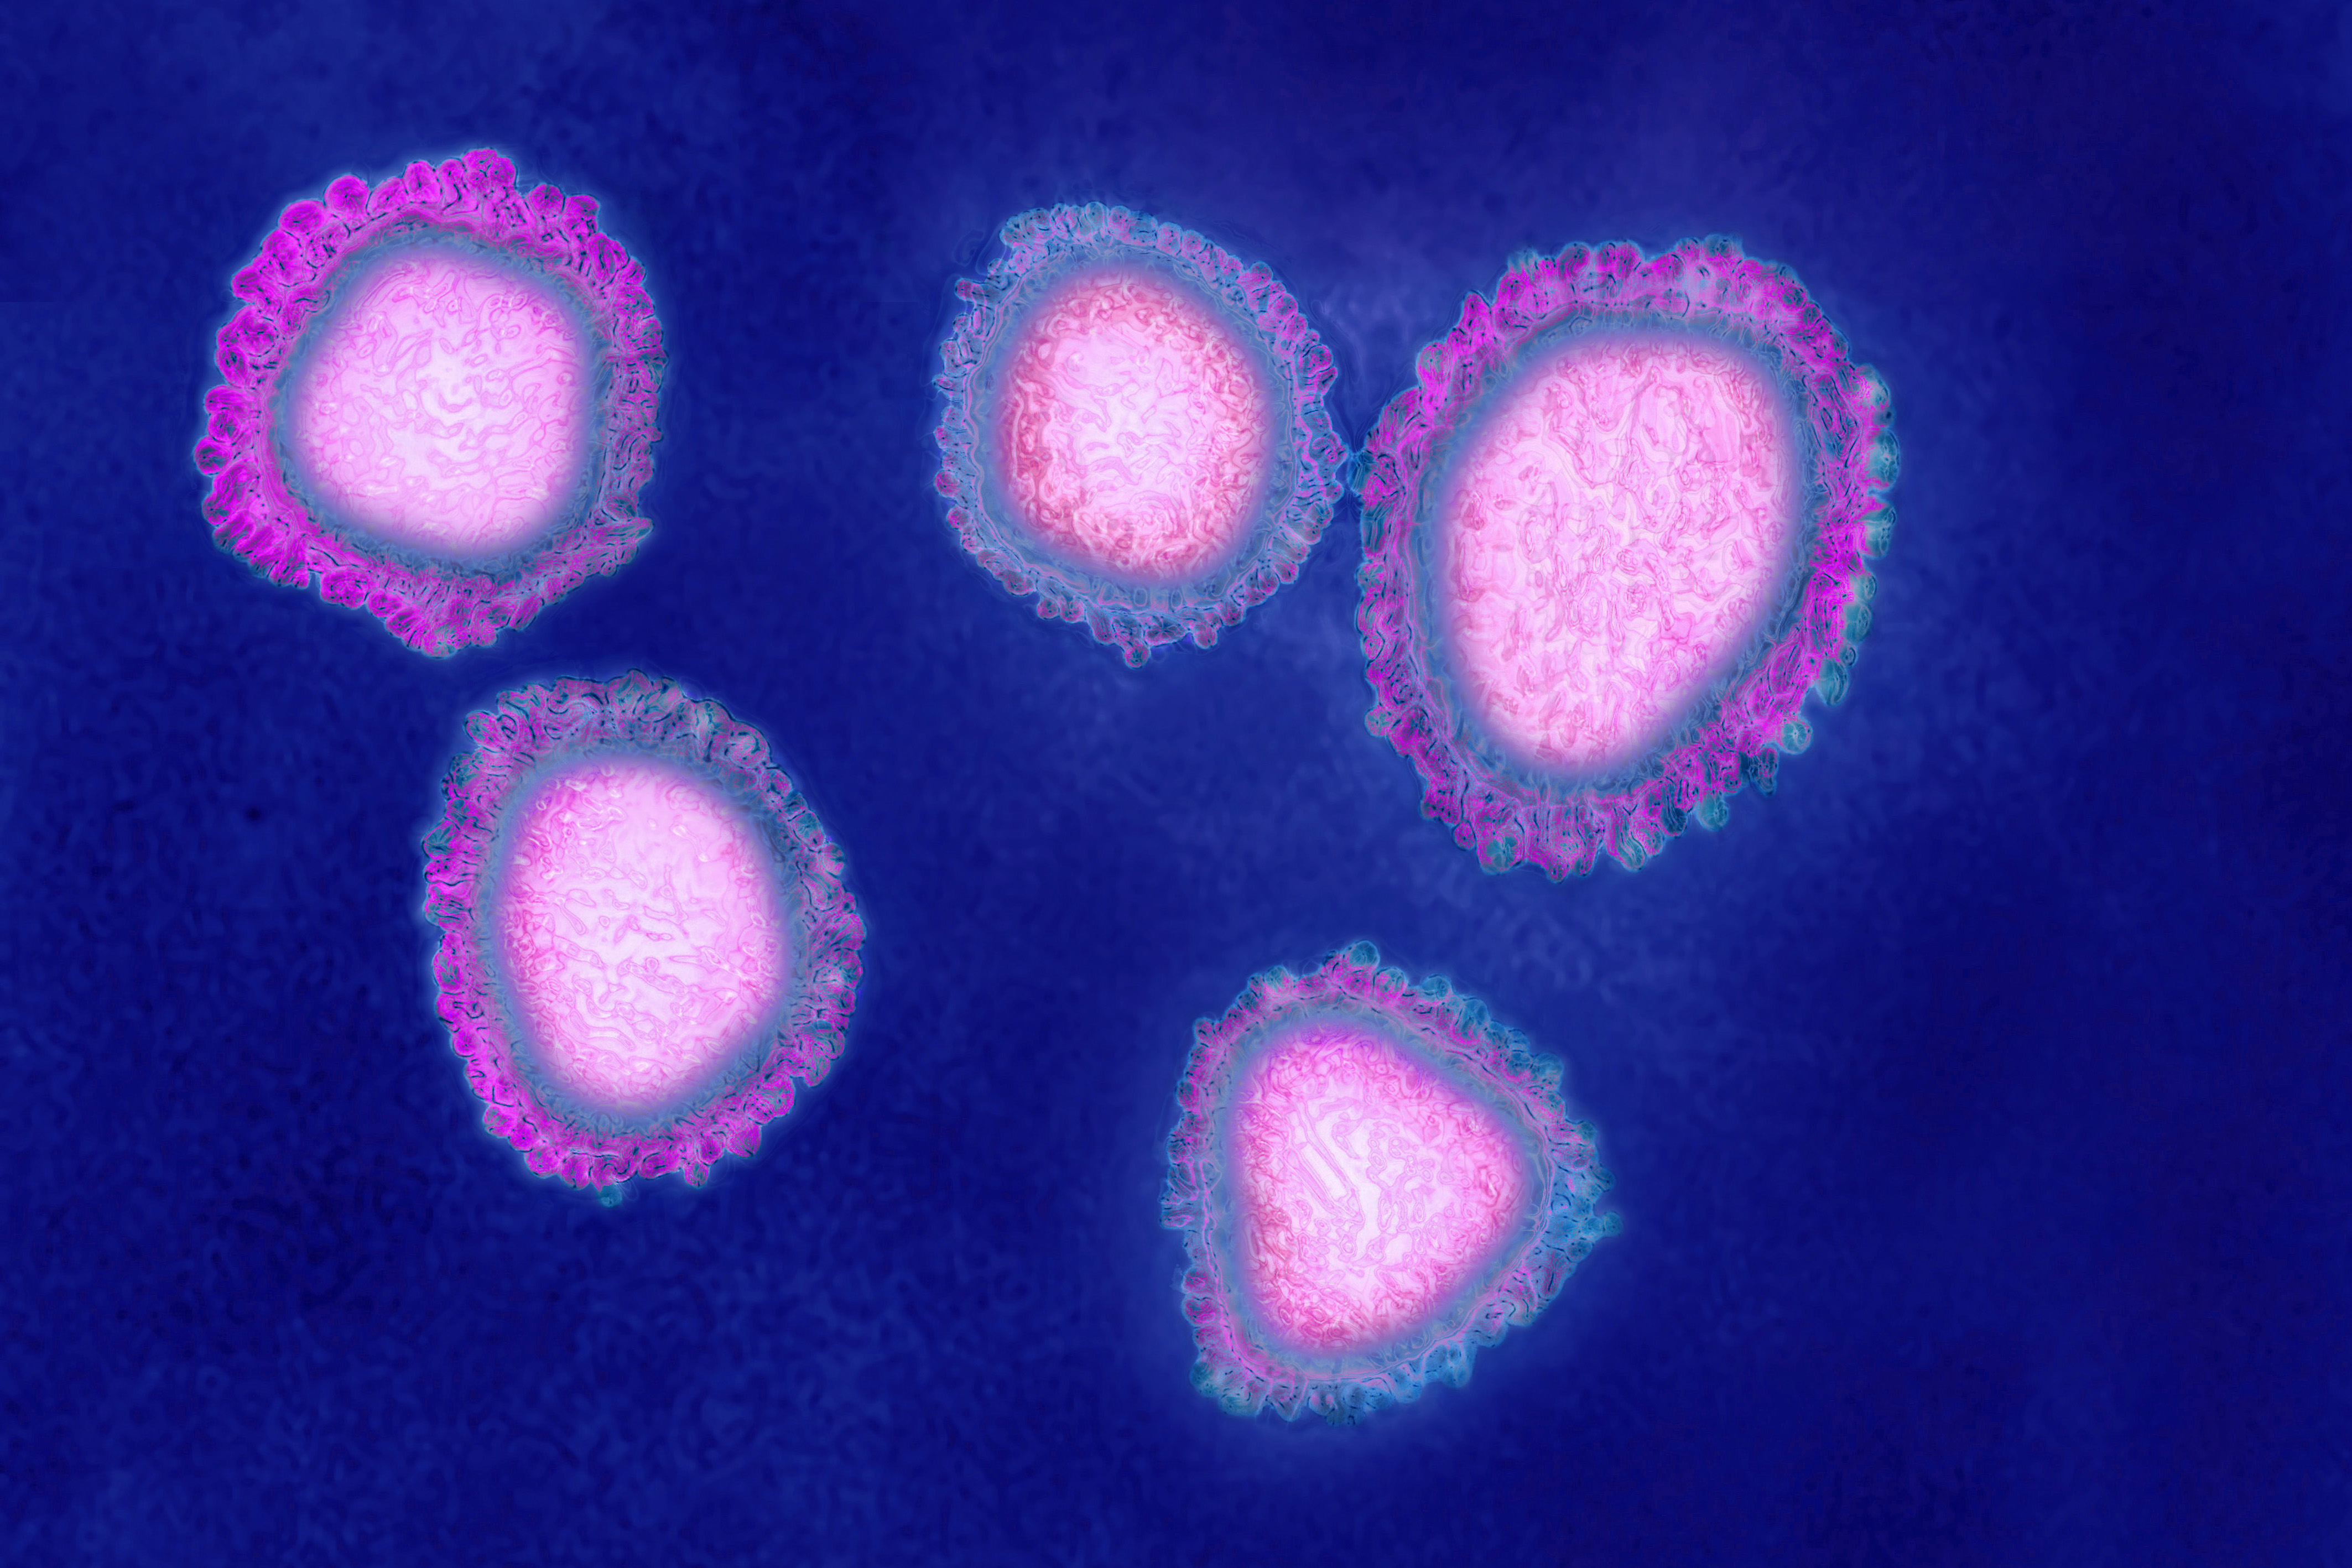 Never-before-seen virus may be behind mystery outbreak in China | Ars Technica4252 x 2835